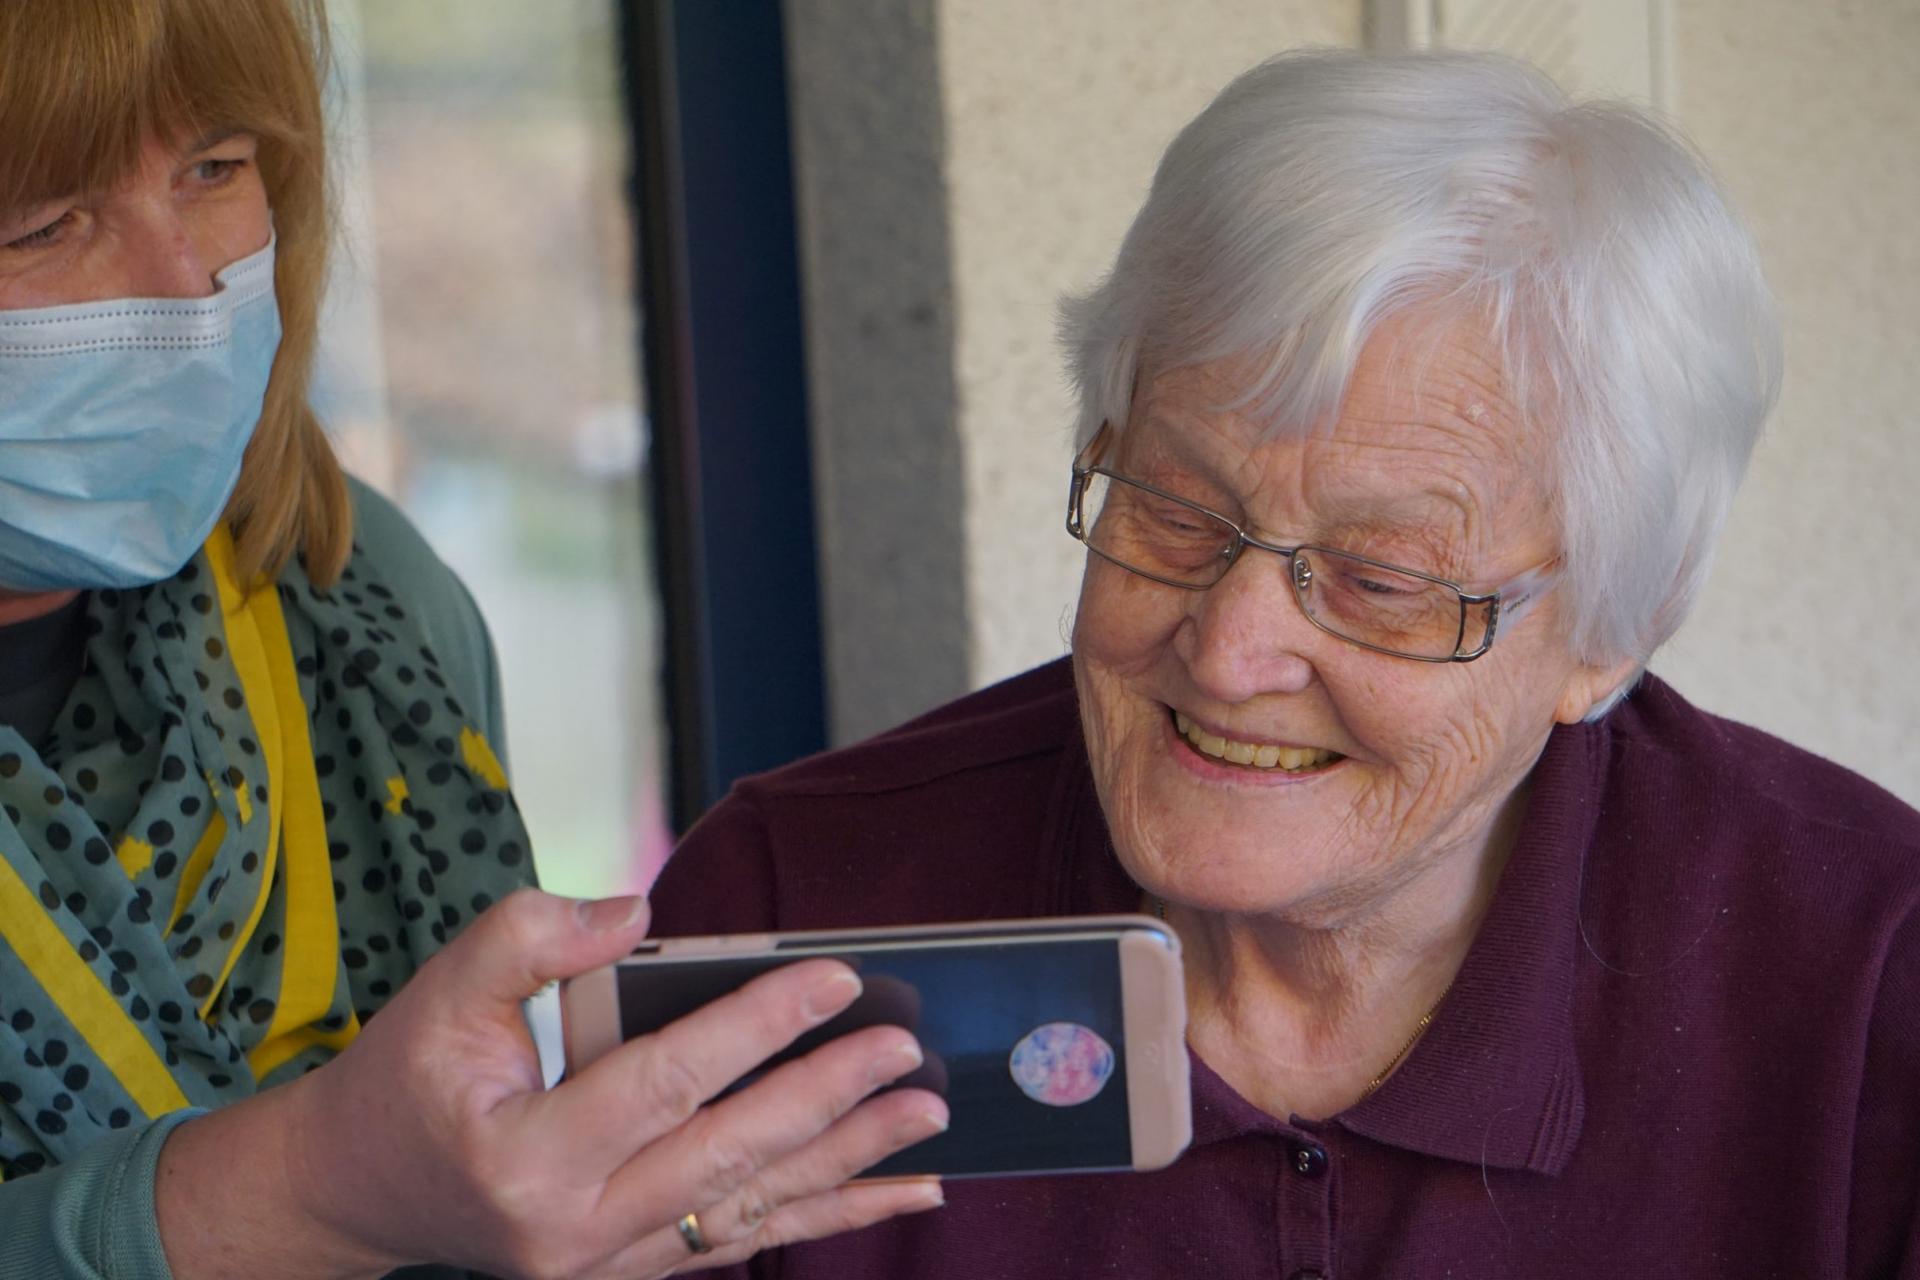 An image of an aged care nurse helping a resident use a smartphone